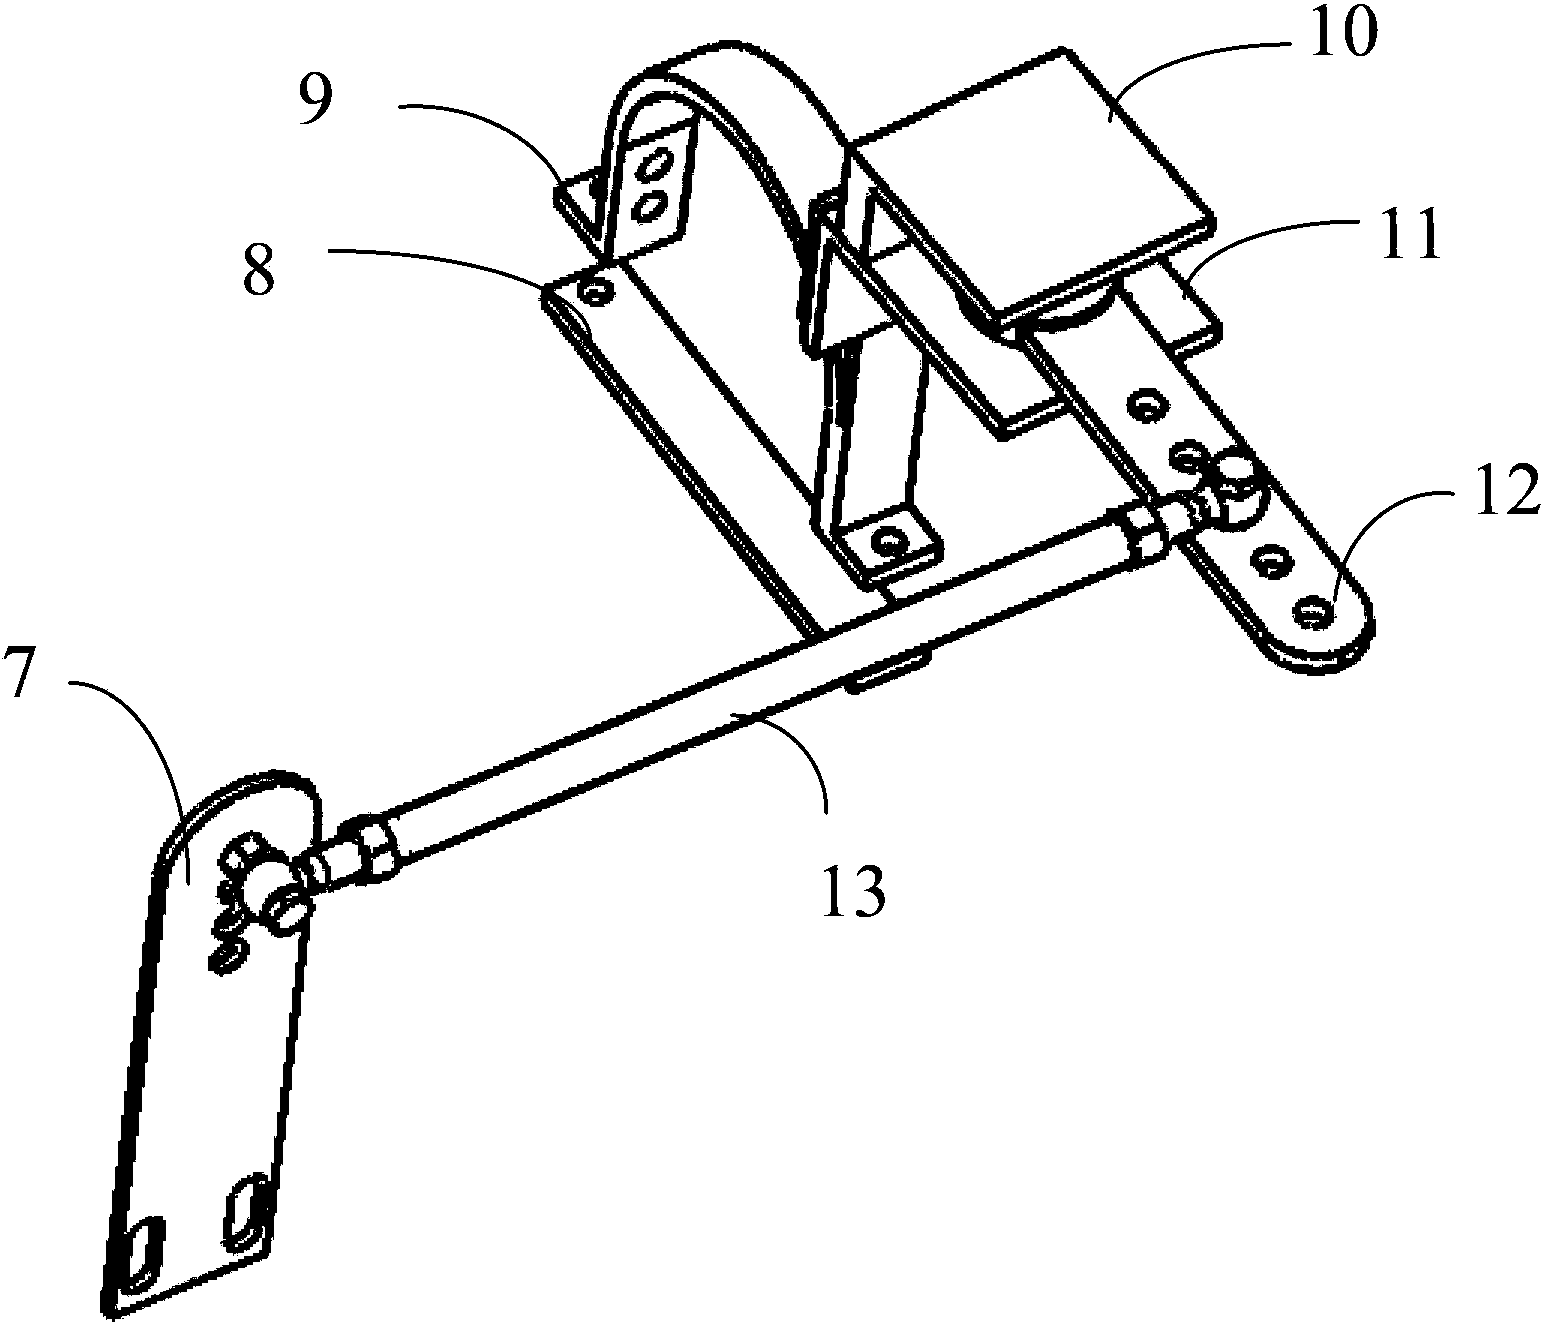 Connecting rod type agricultural machine wheel turning angle measuring mechanism and measuring method